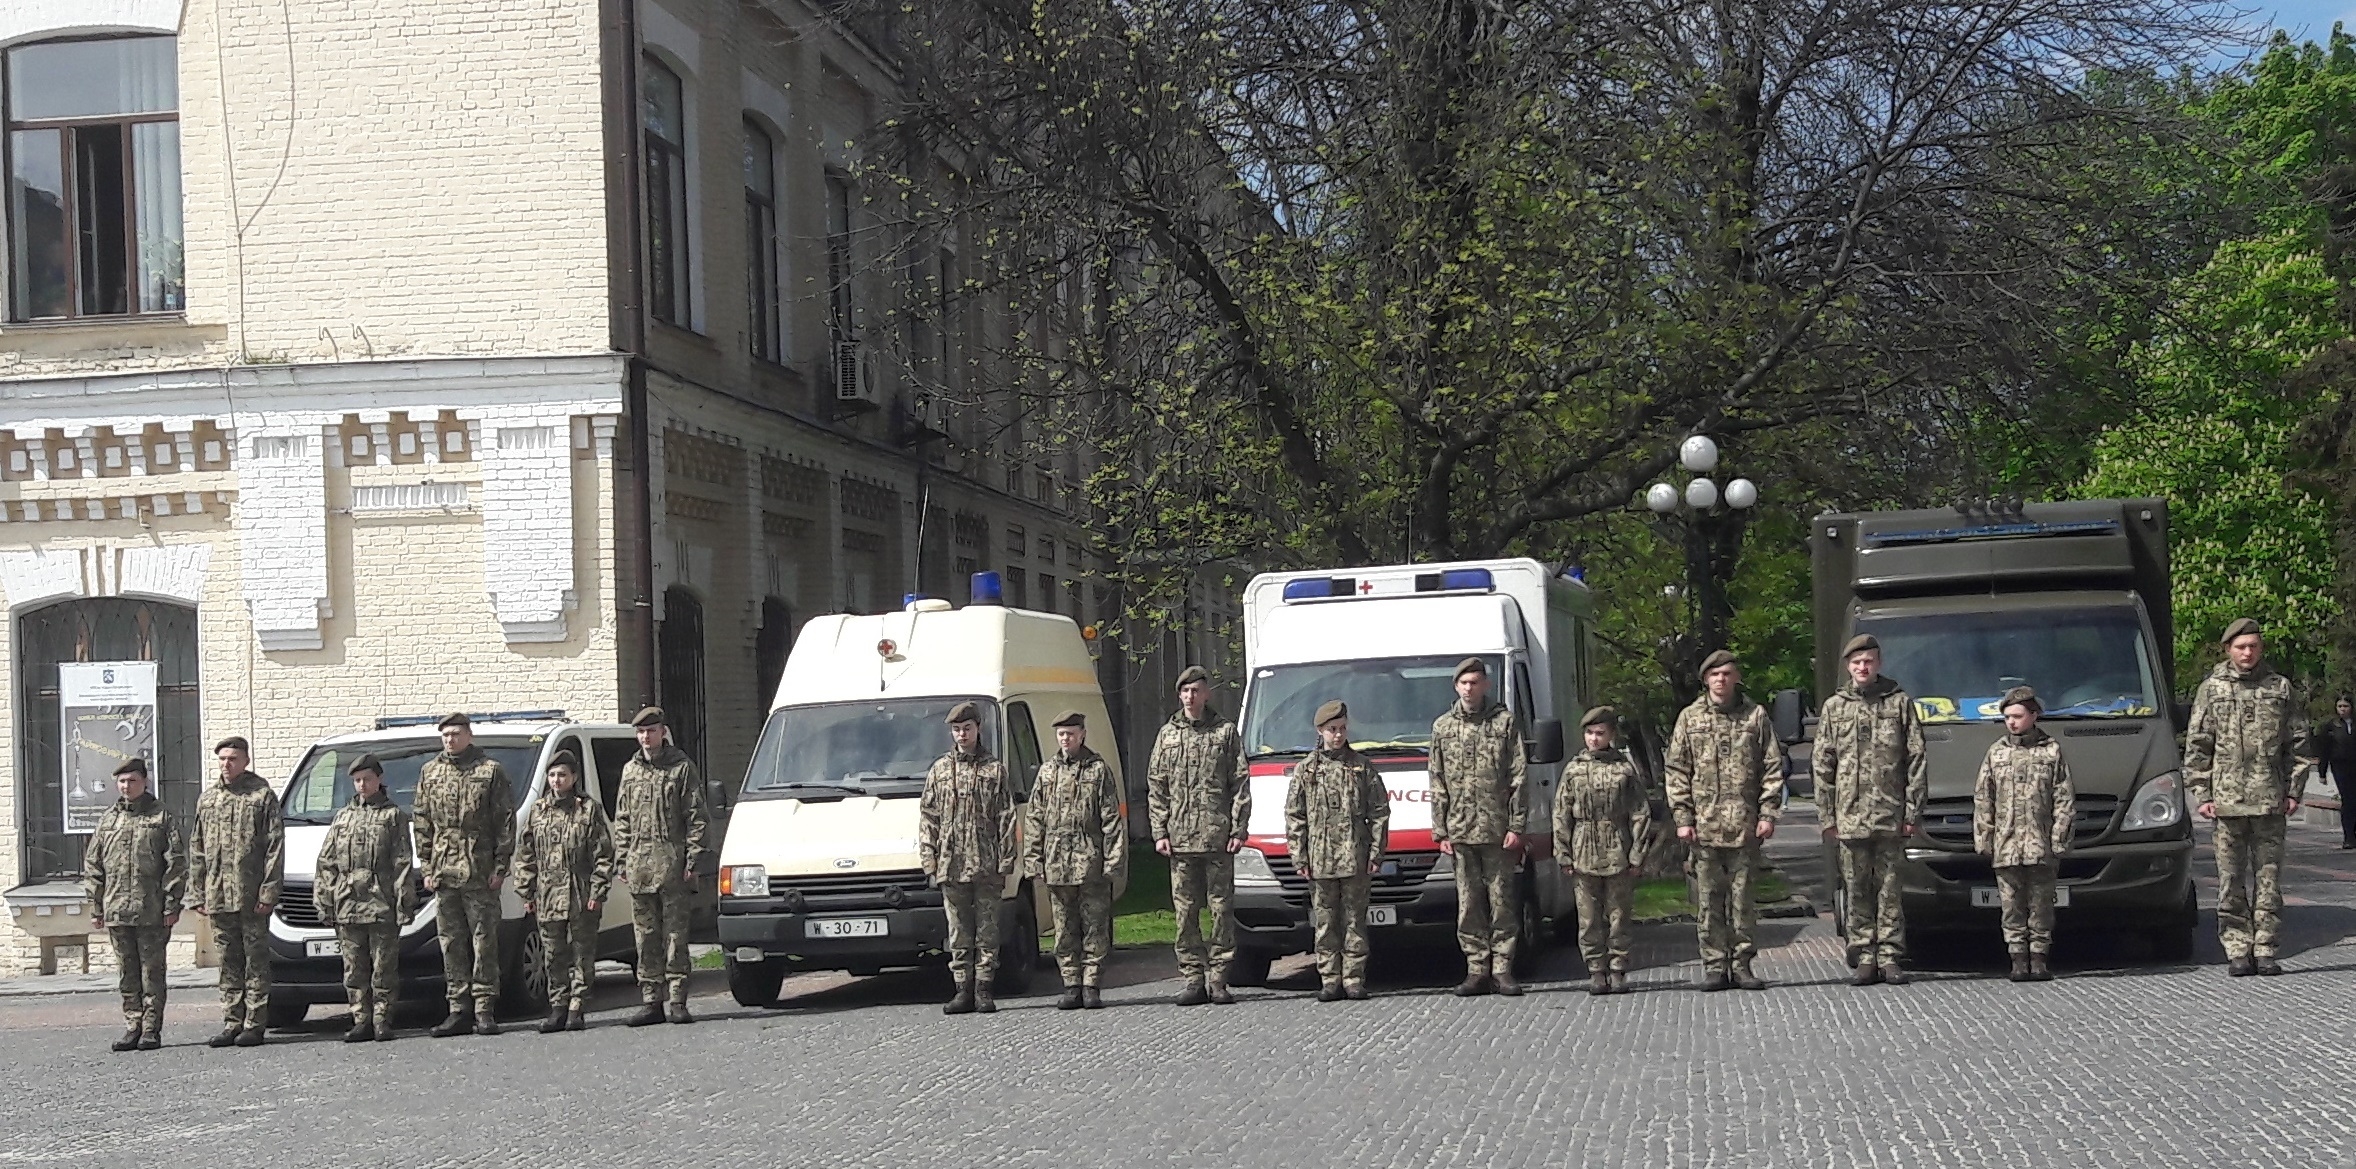 FRONTLINE AMBULANCES ARRIVE FROM BELGIUM TO AID WOUNDED UKRAINIAN SOLDIERS